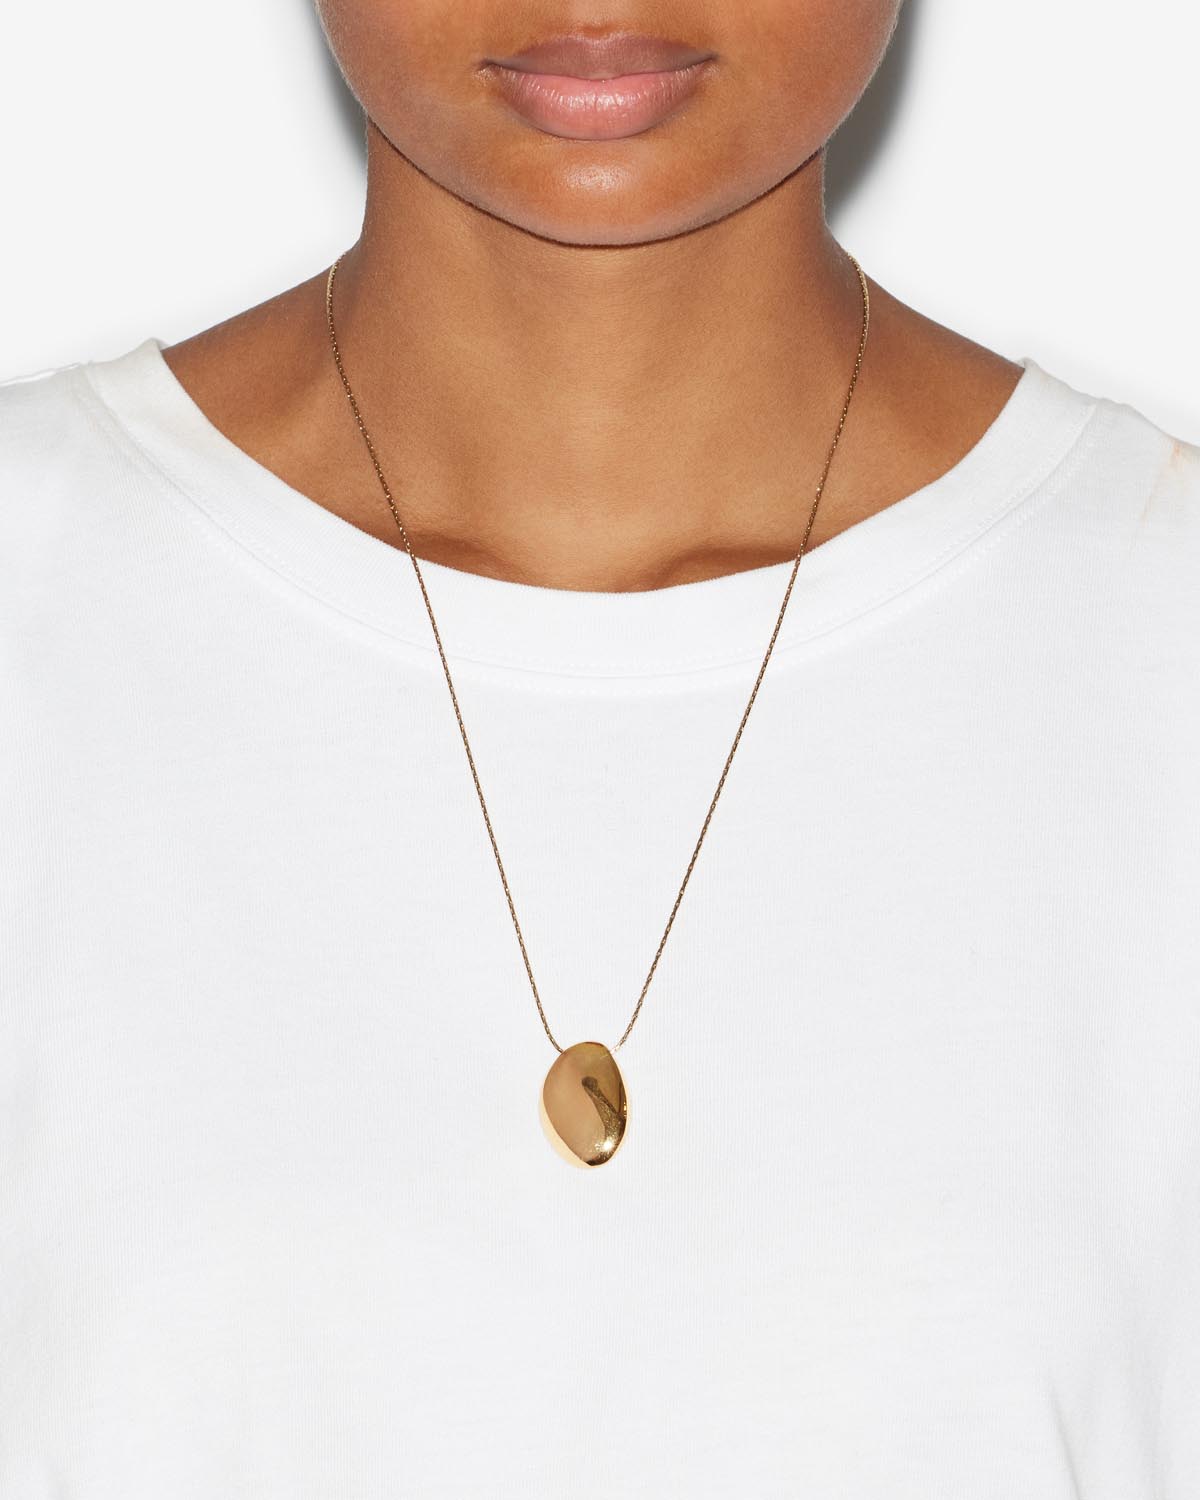 Shiny day necklace Woman Gold 1